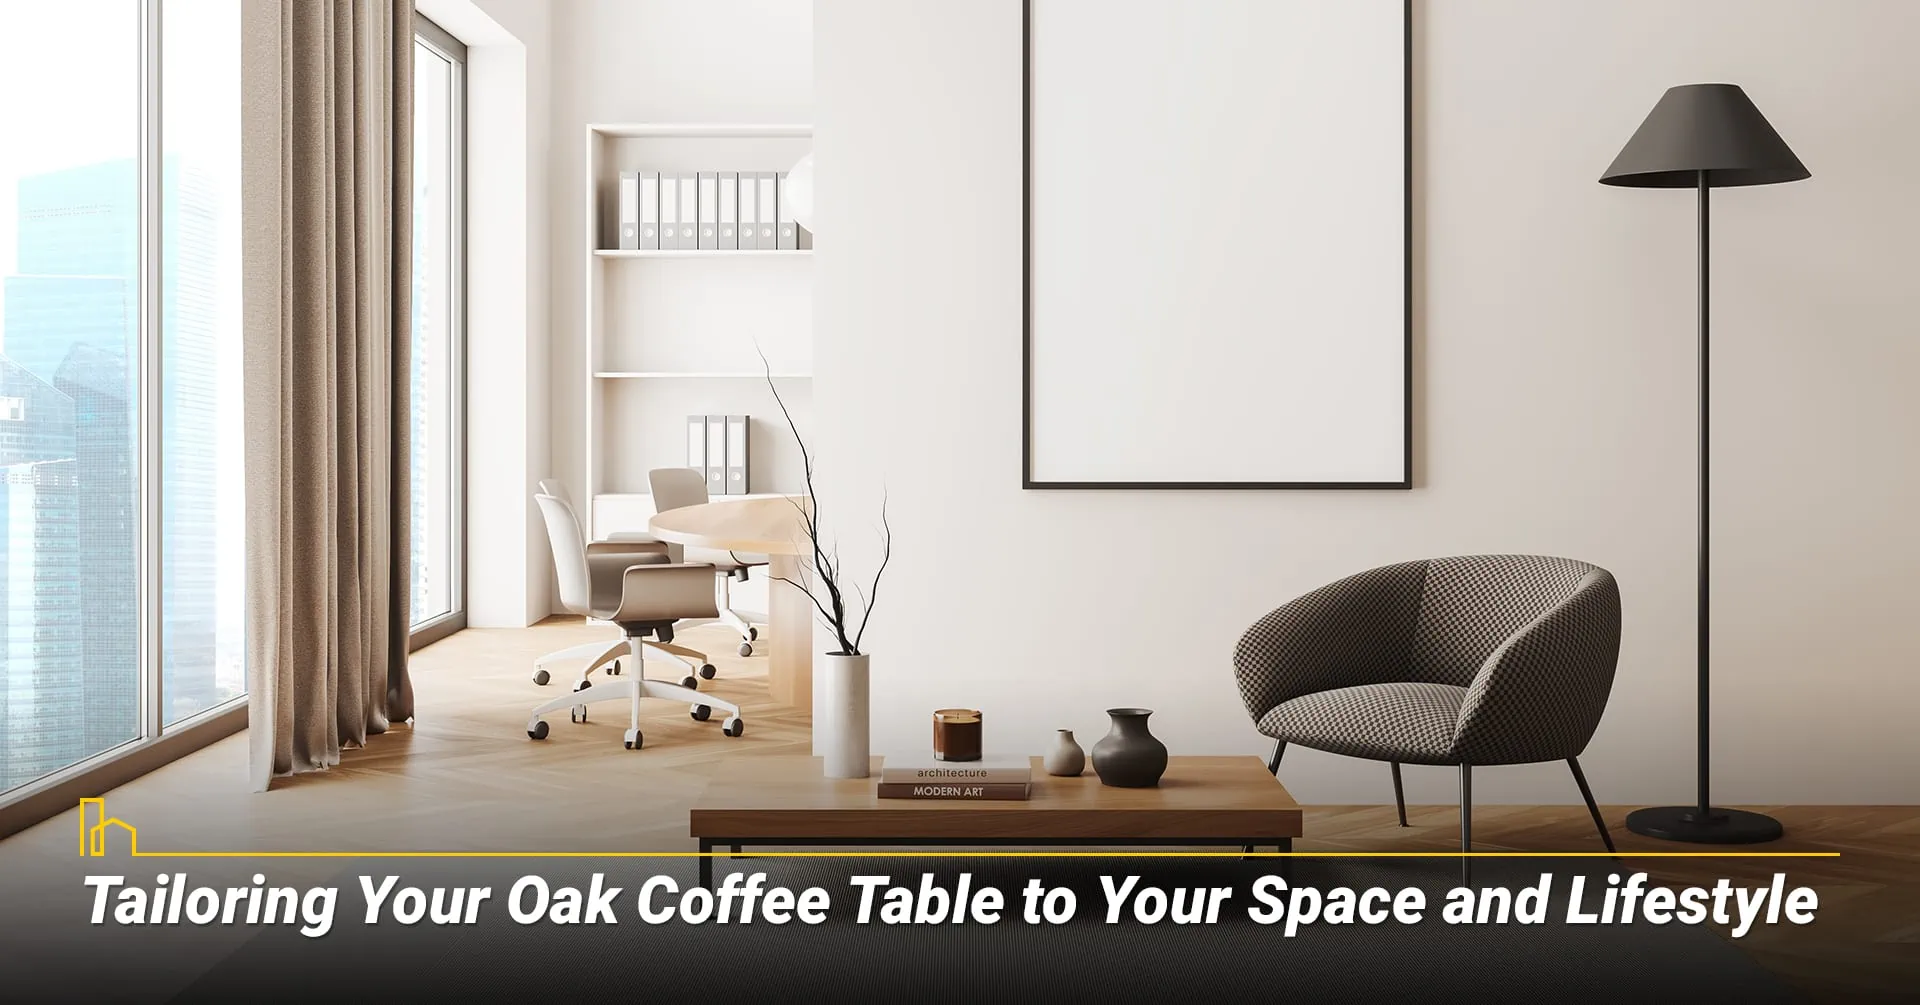 3. Tailoring Your Oak Coffee Table to Your Space and Lifestyle